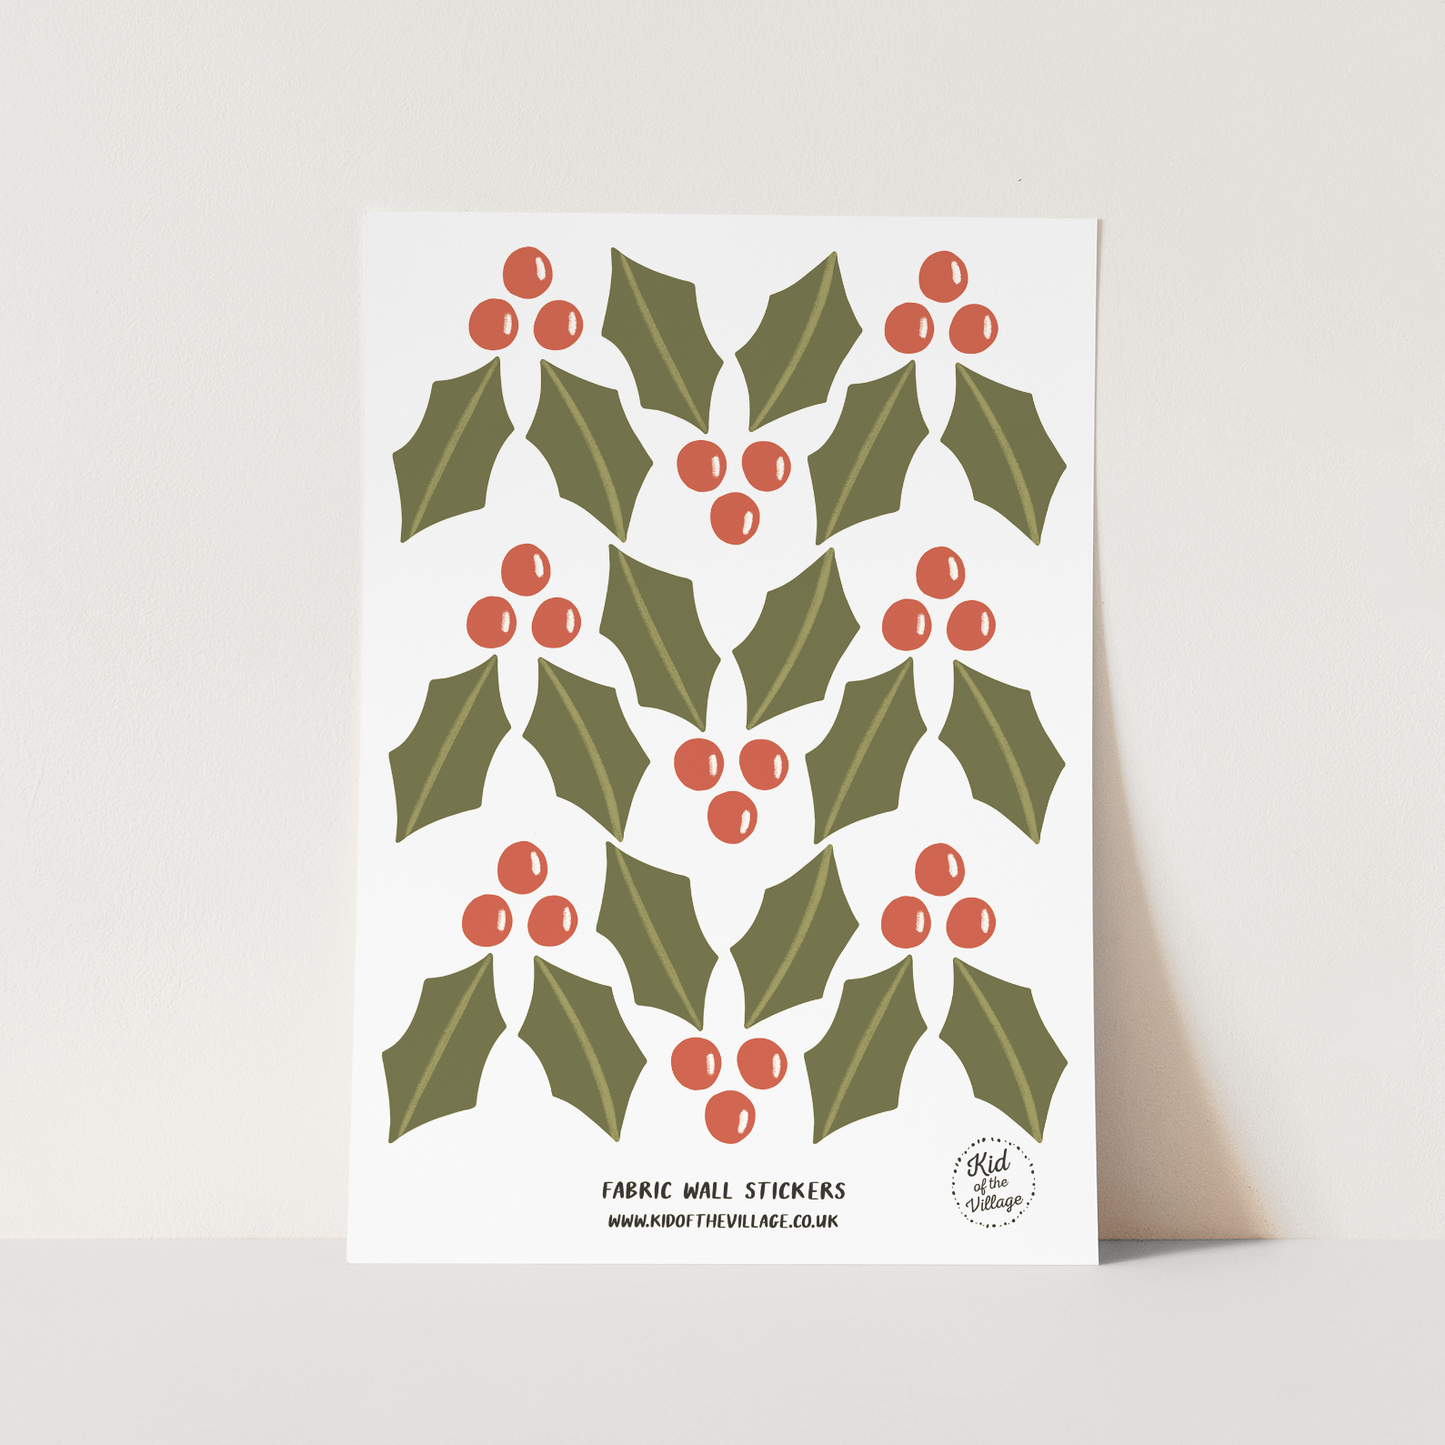 Holly / Fabric Wall Stickers